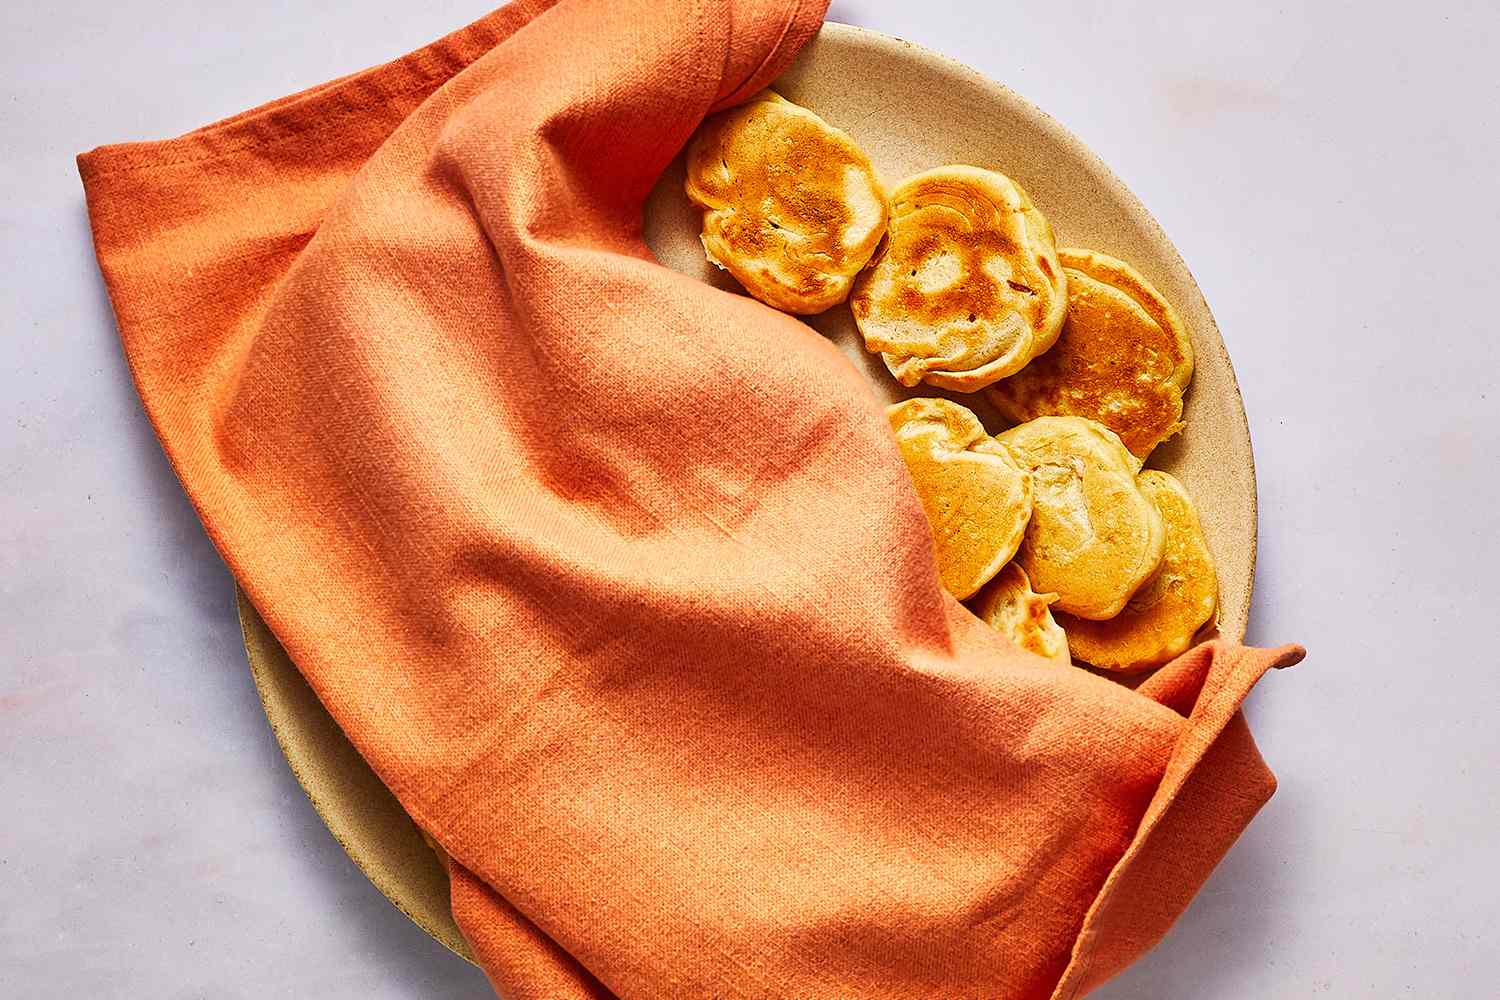 blini on plate covered with orange towel